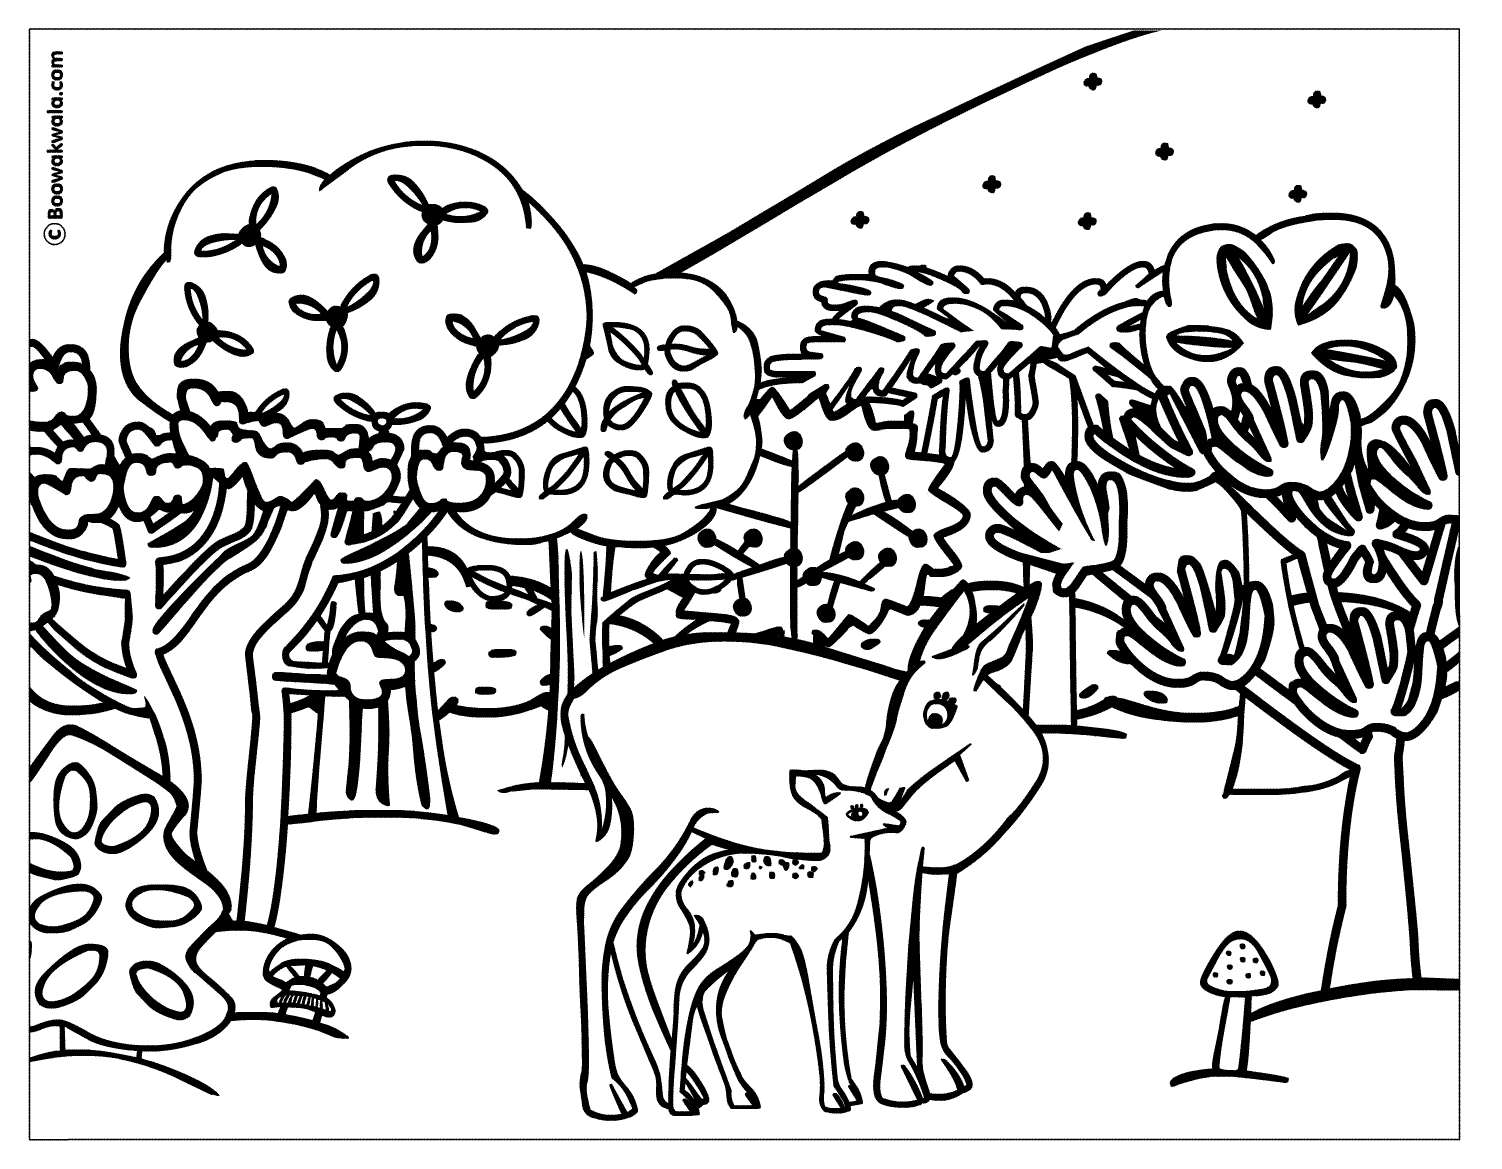 Animal Forest Coloring Pages for Kindergarten